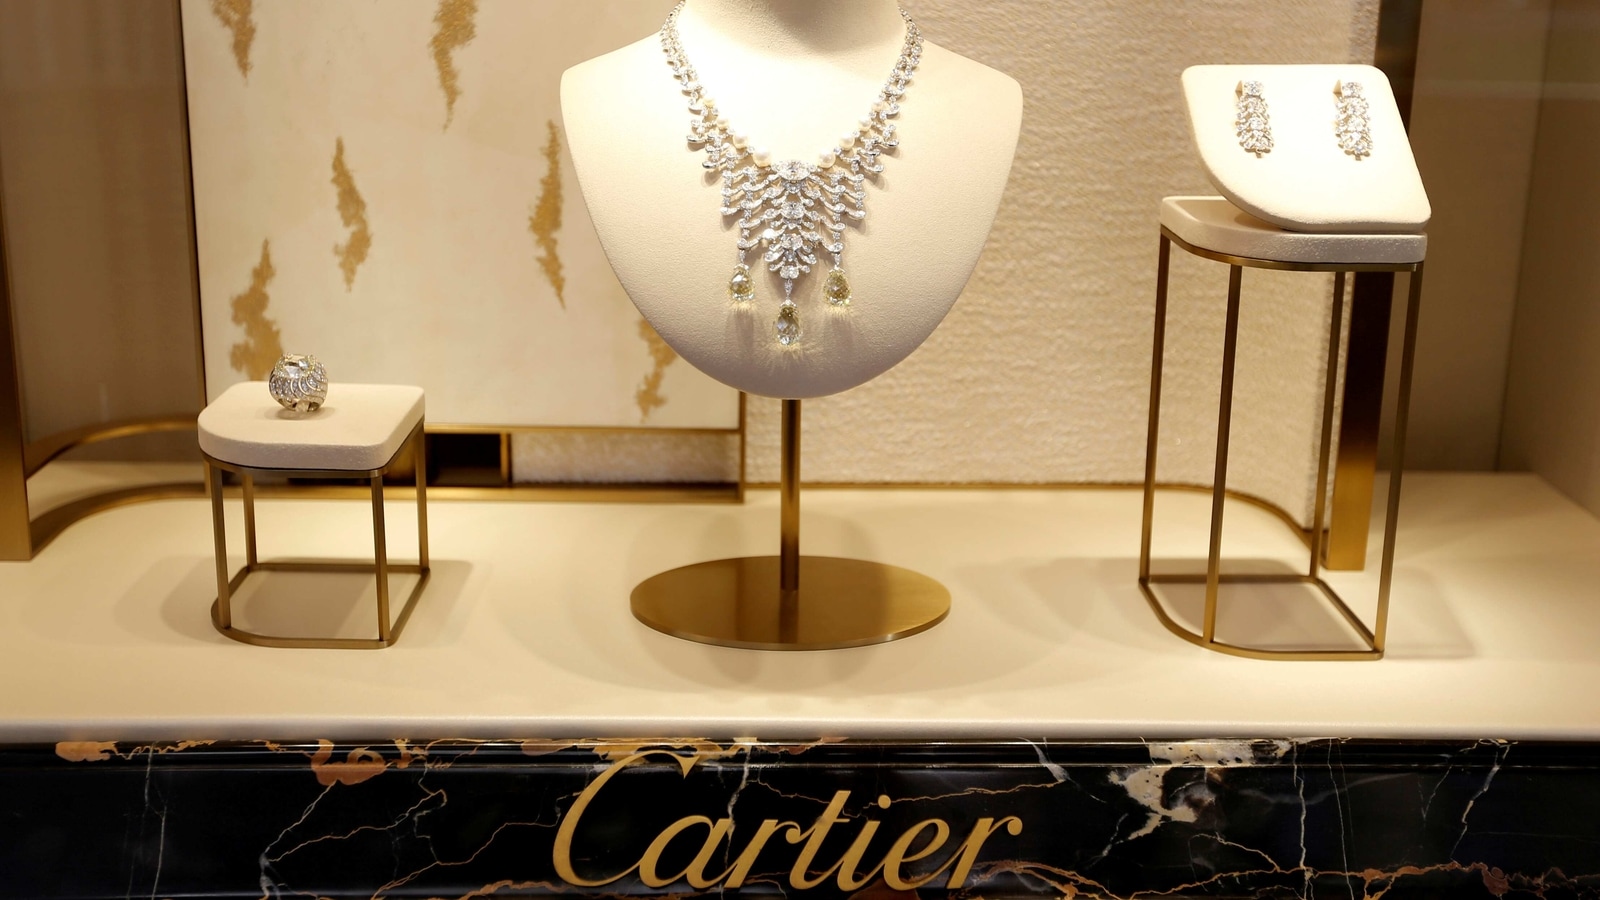 cartier company owner